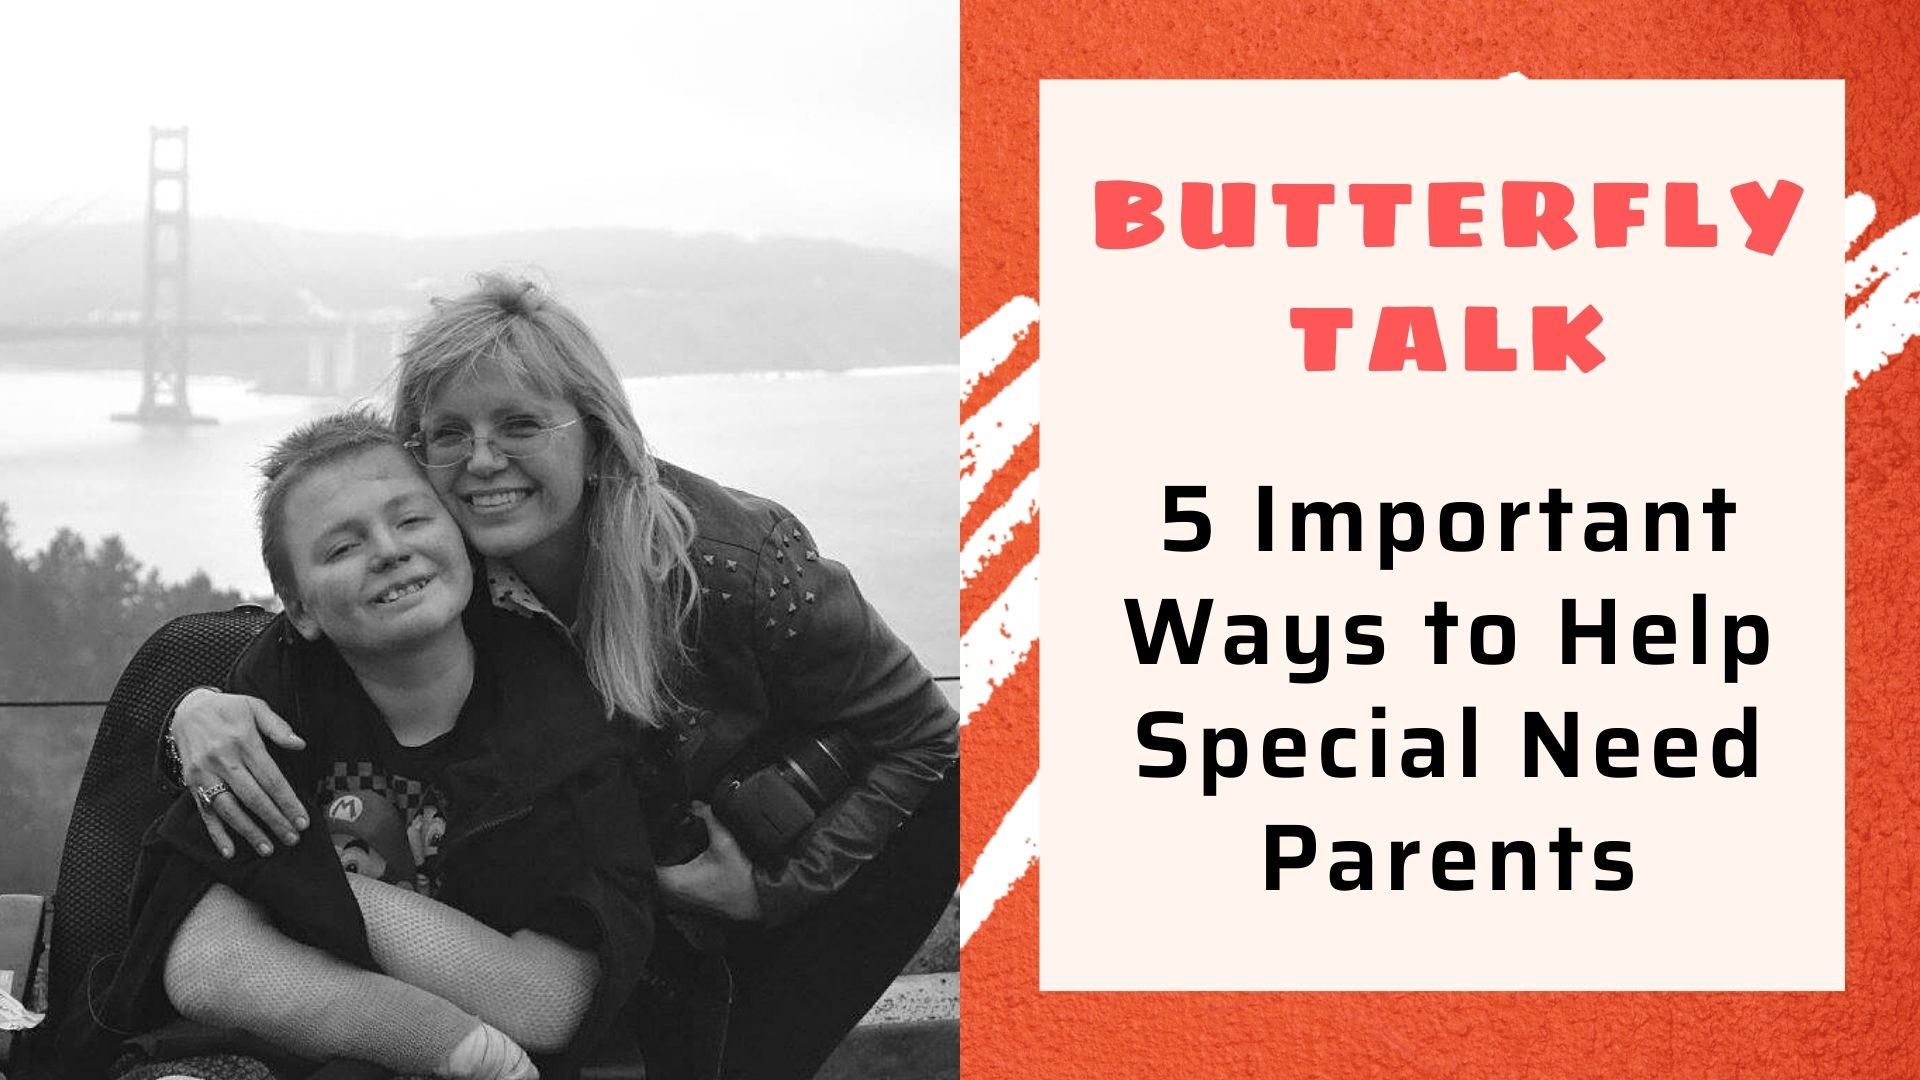 Butterfly Talk Episode 11 - 5 Important Ways to Help Special Need Parents